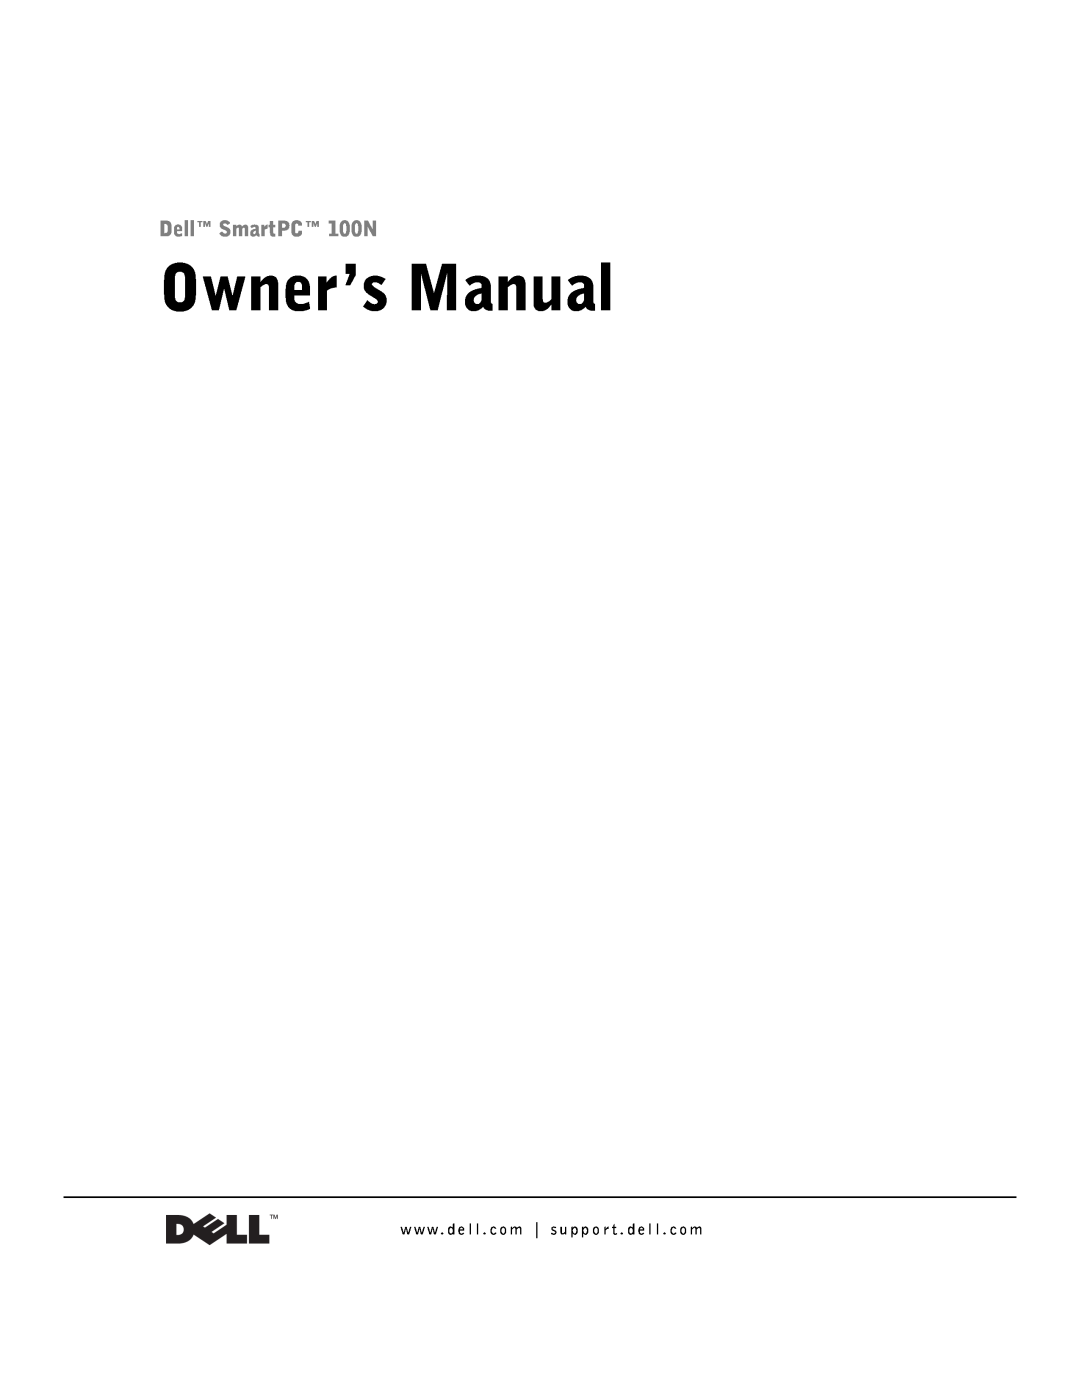 Dell owner manual Owner’s Manual, Dell SmartPC 100N 